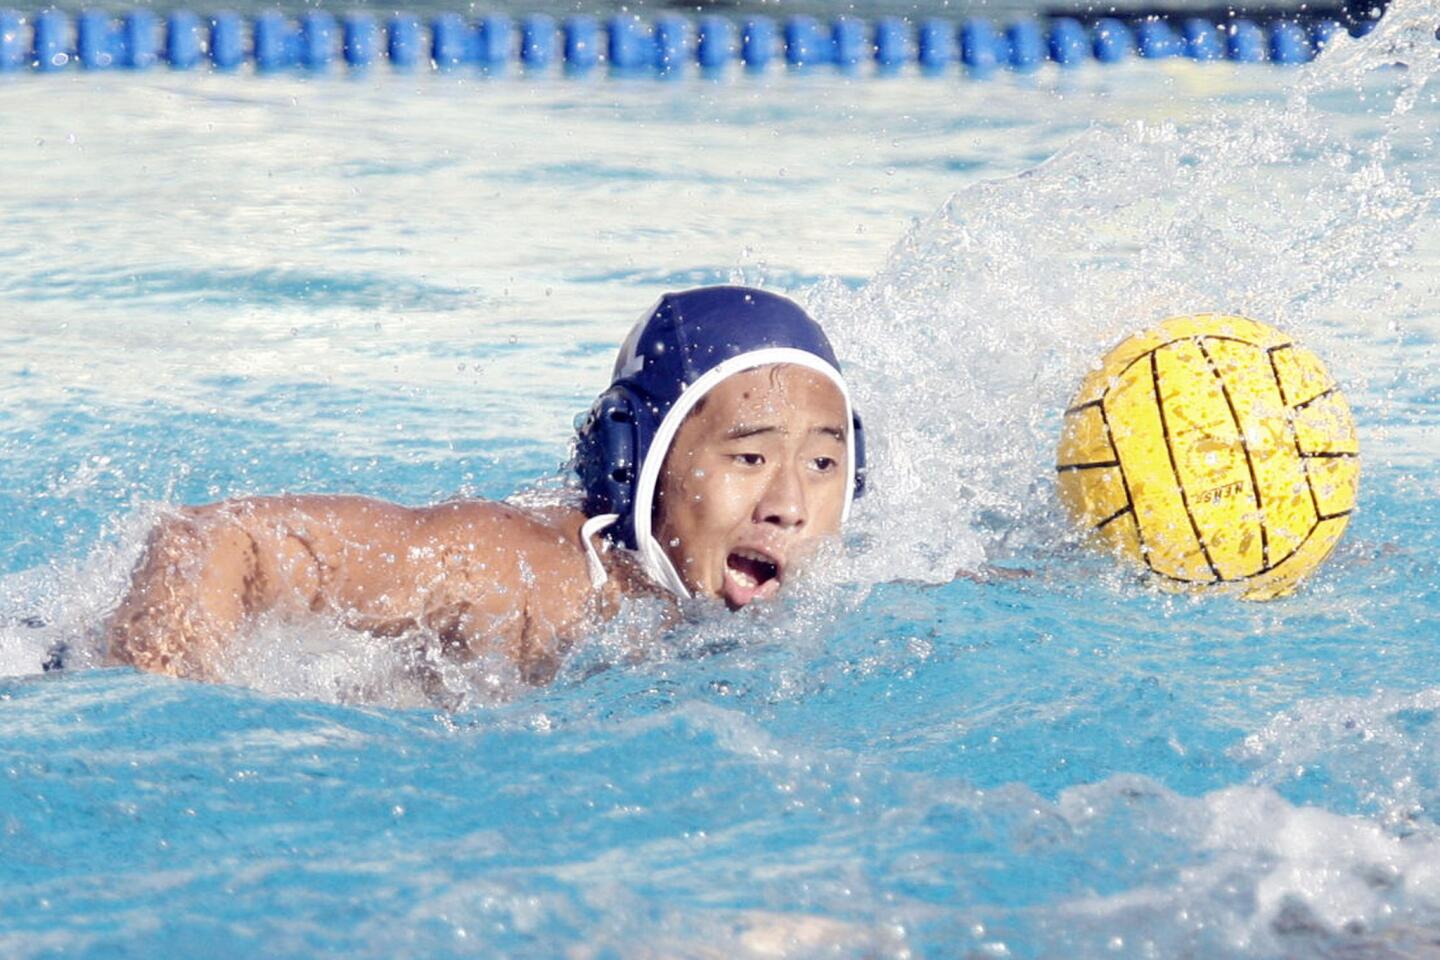 CV's Daniel Park takes possession over the ball during a match against Cerritos at PCC on Wednesday, October 3, 2012.